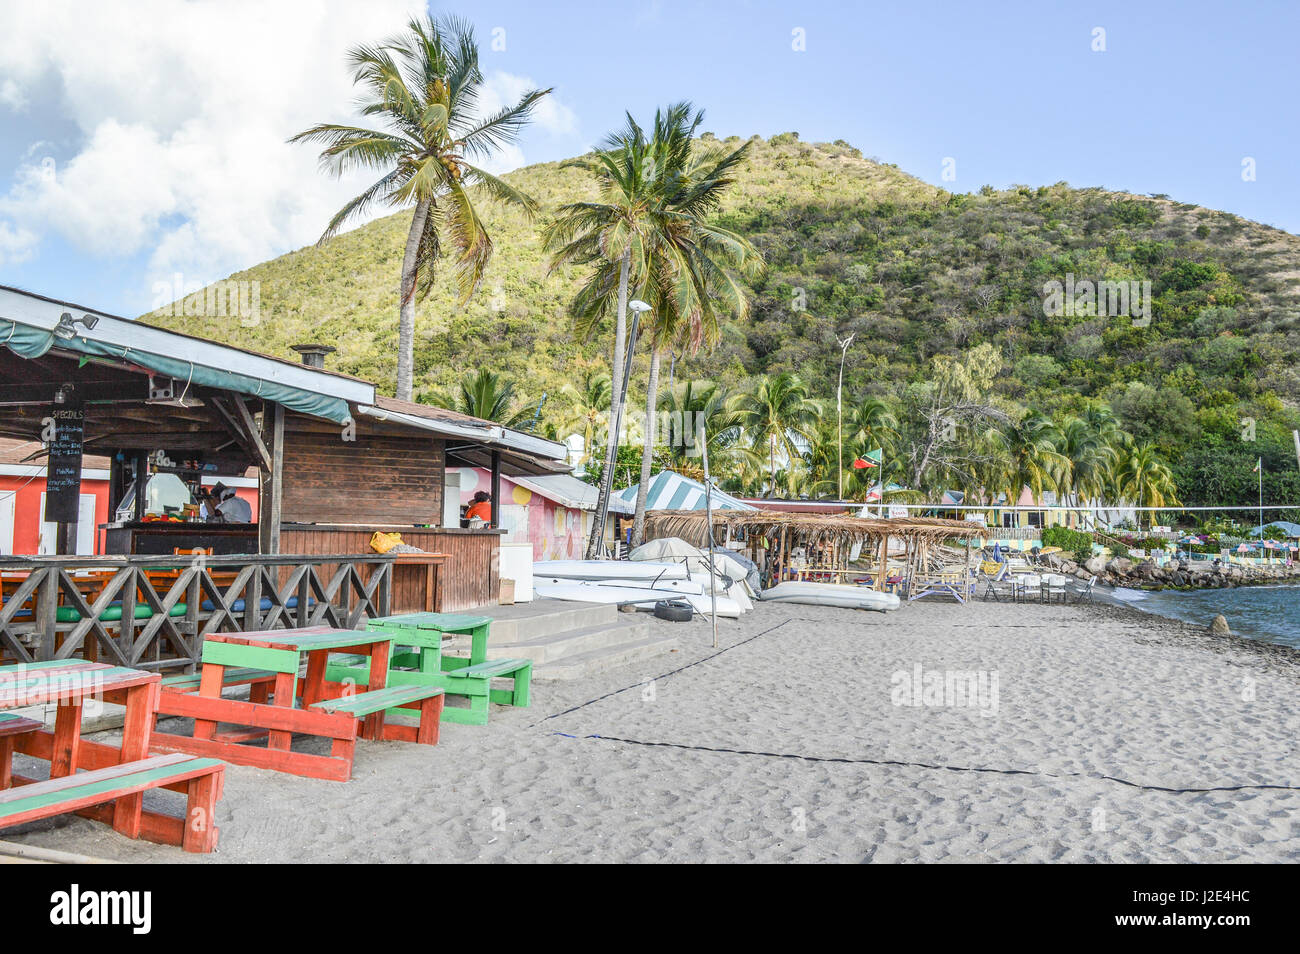 Volleyball net set up next to restaurants on the beach in St-Kitts-Nevis Stock Photo